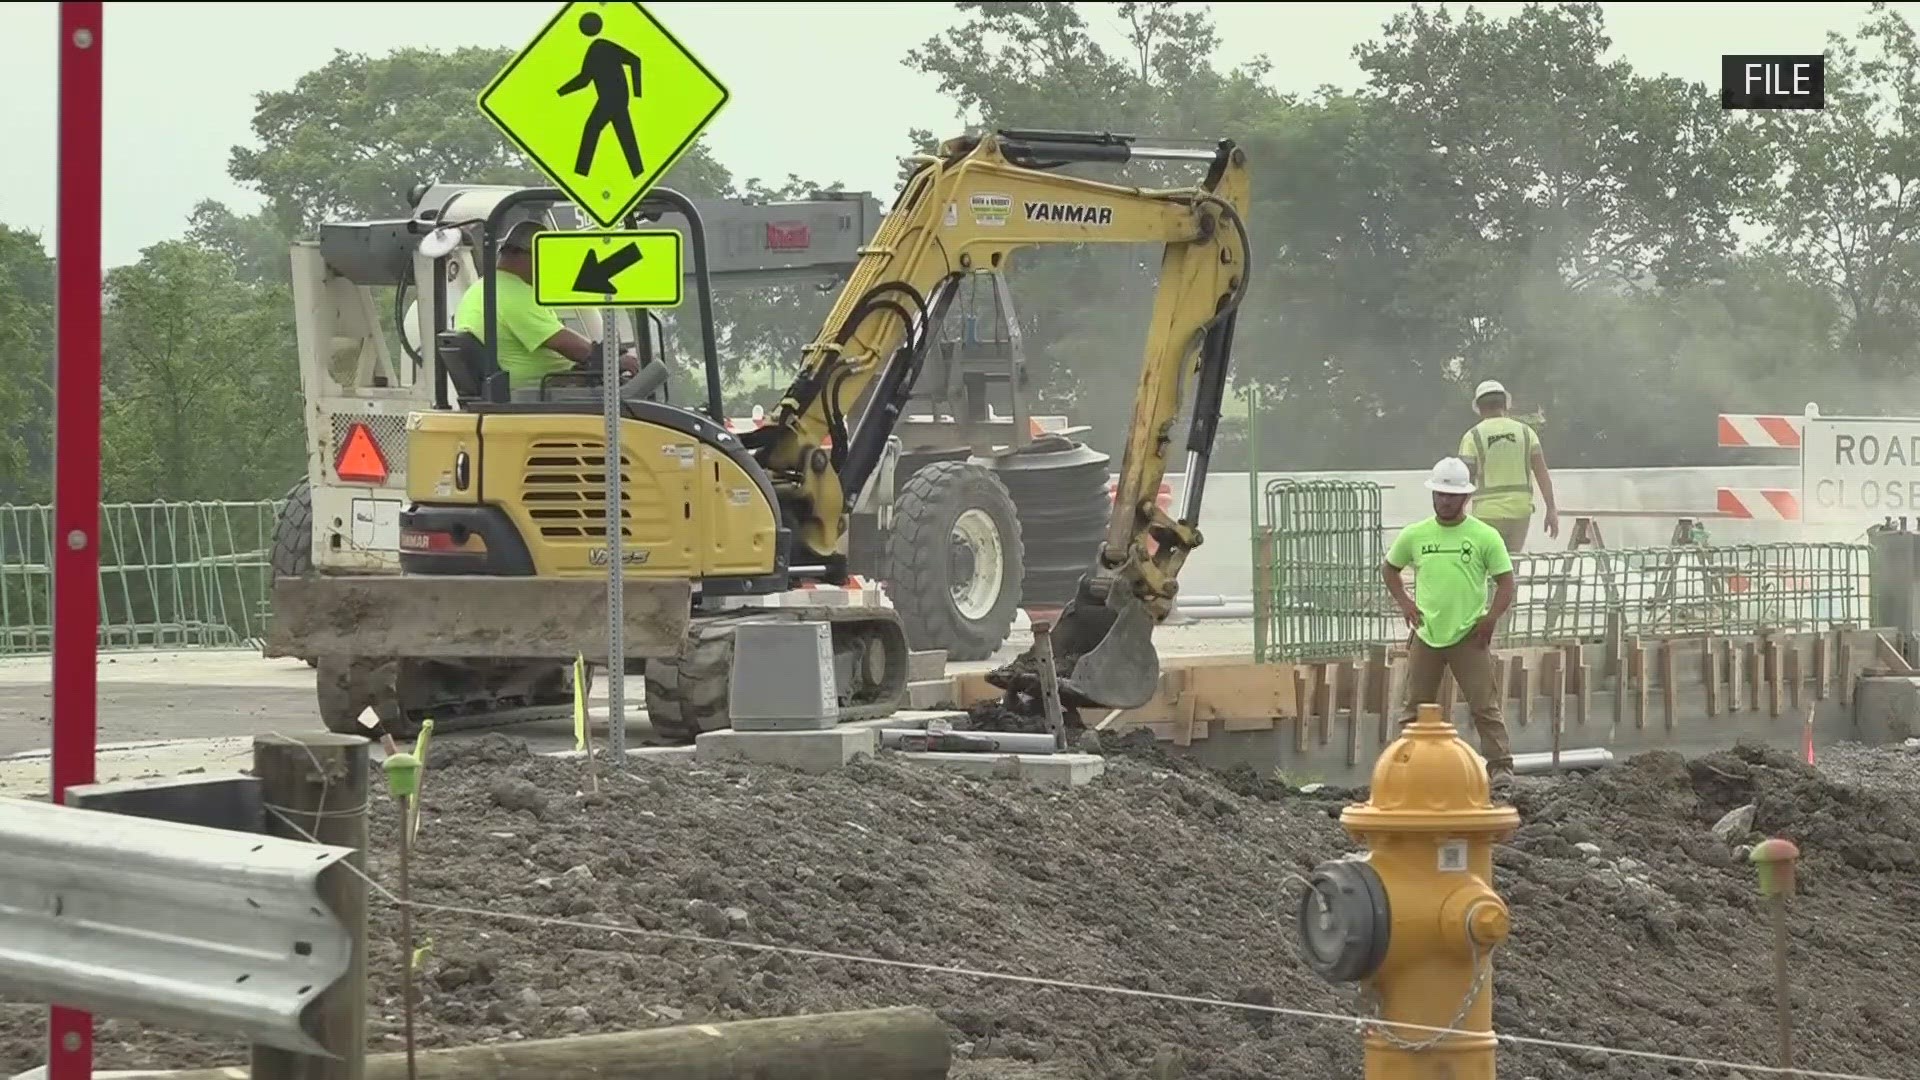 With over 1,000 projects planned for 2023, ODOT and the Ohio State Highway Patrol want to make sure drivers avoid incident in work zones.